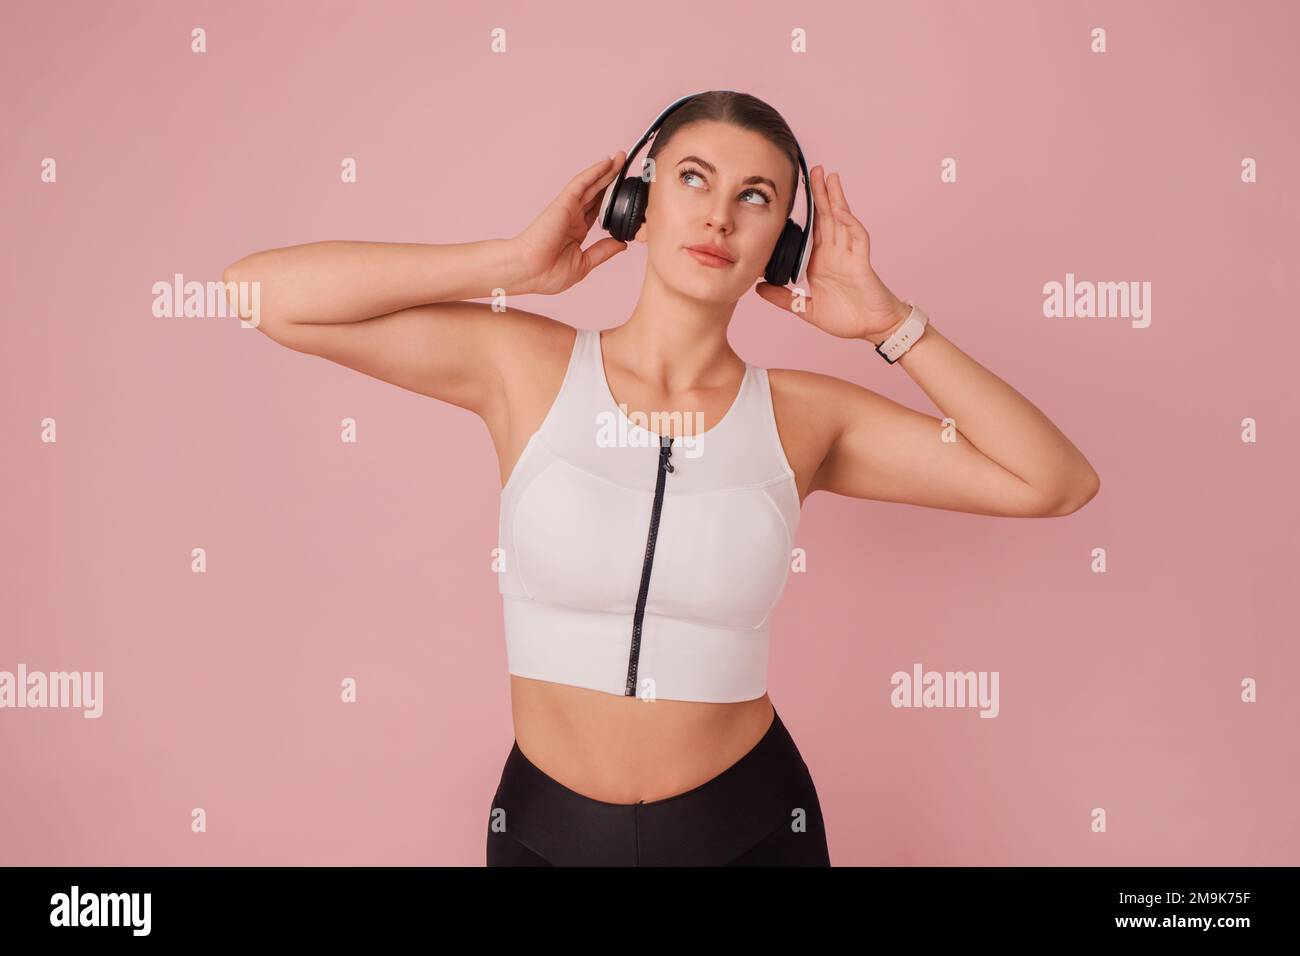 Stylish young woman listening music from white headphones. Girl in sportswear holding earphones and looking up on pink background. Studio portrait Stock Photo